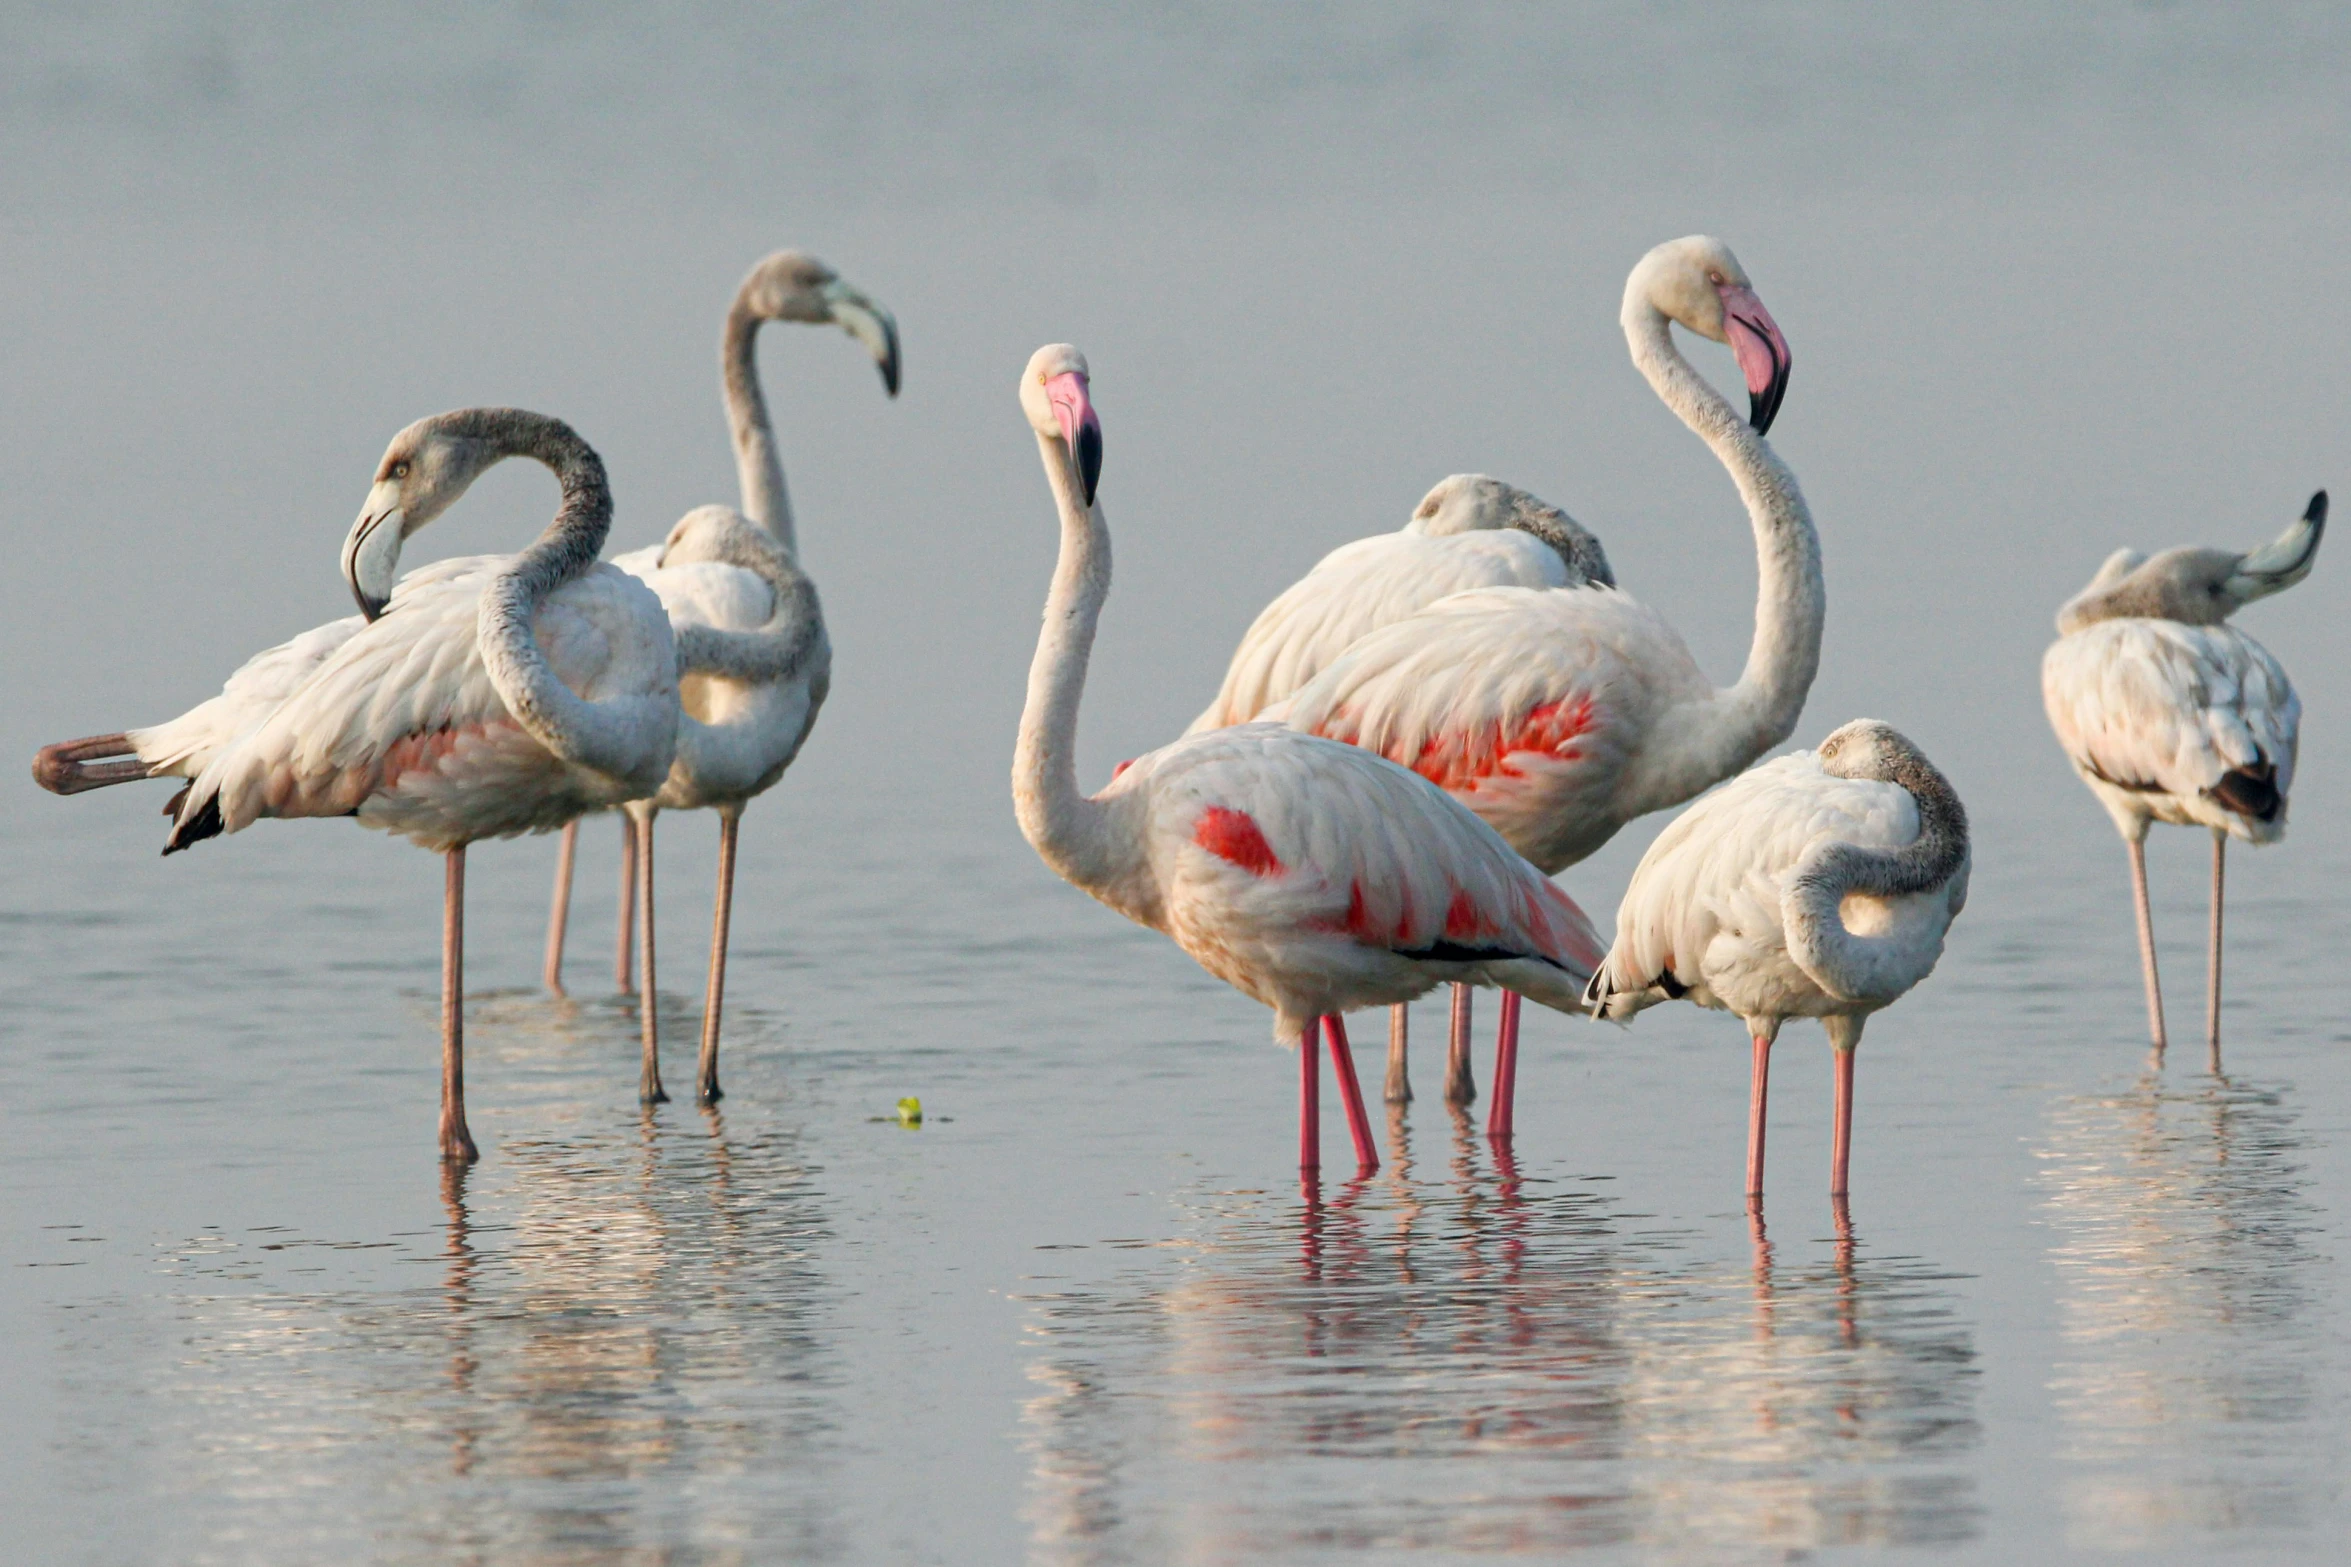 five flamingos and four more flamingoes stand in the water